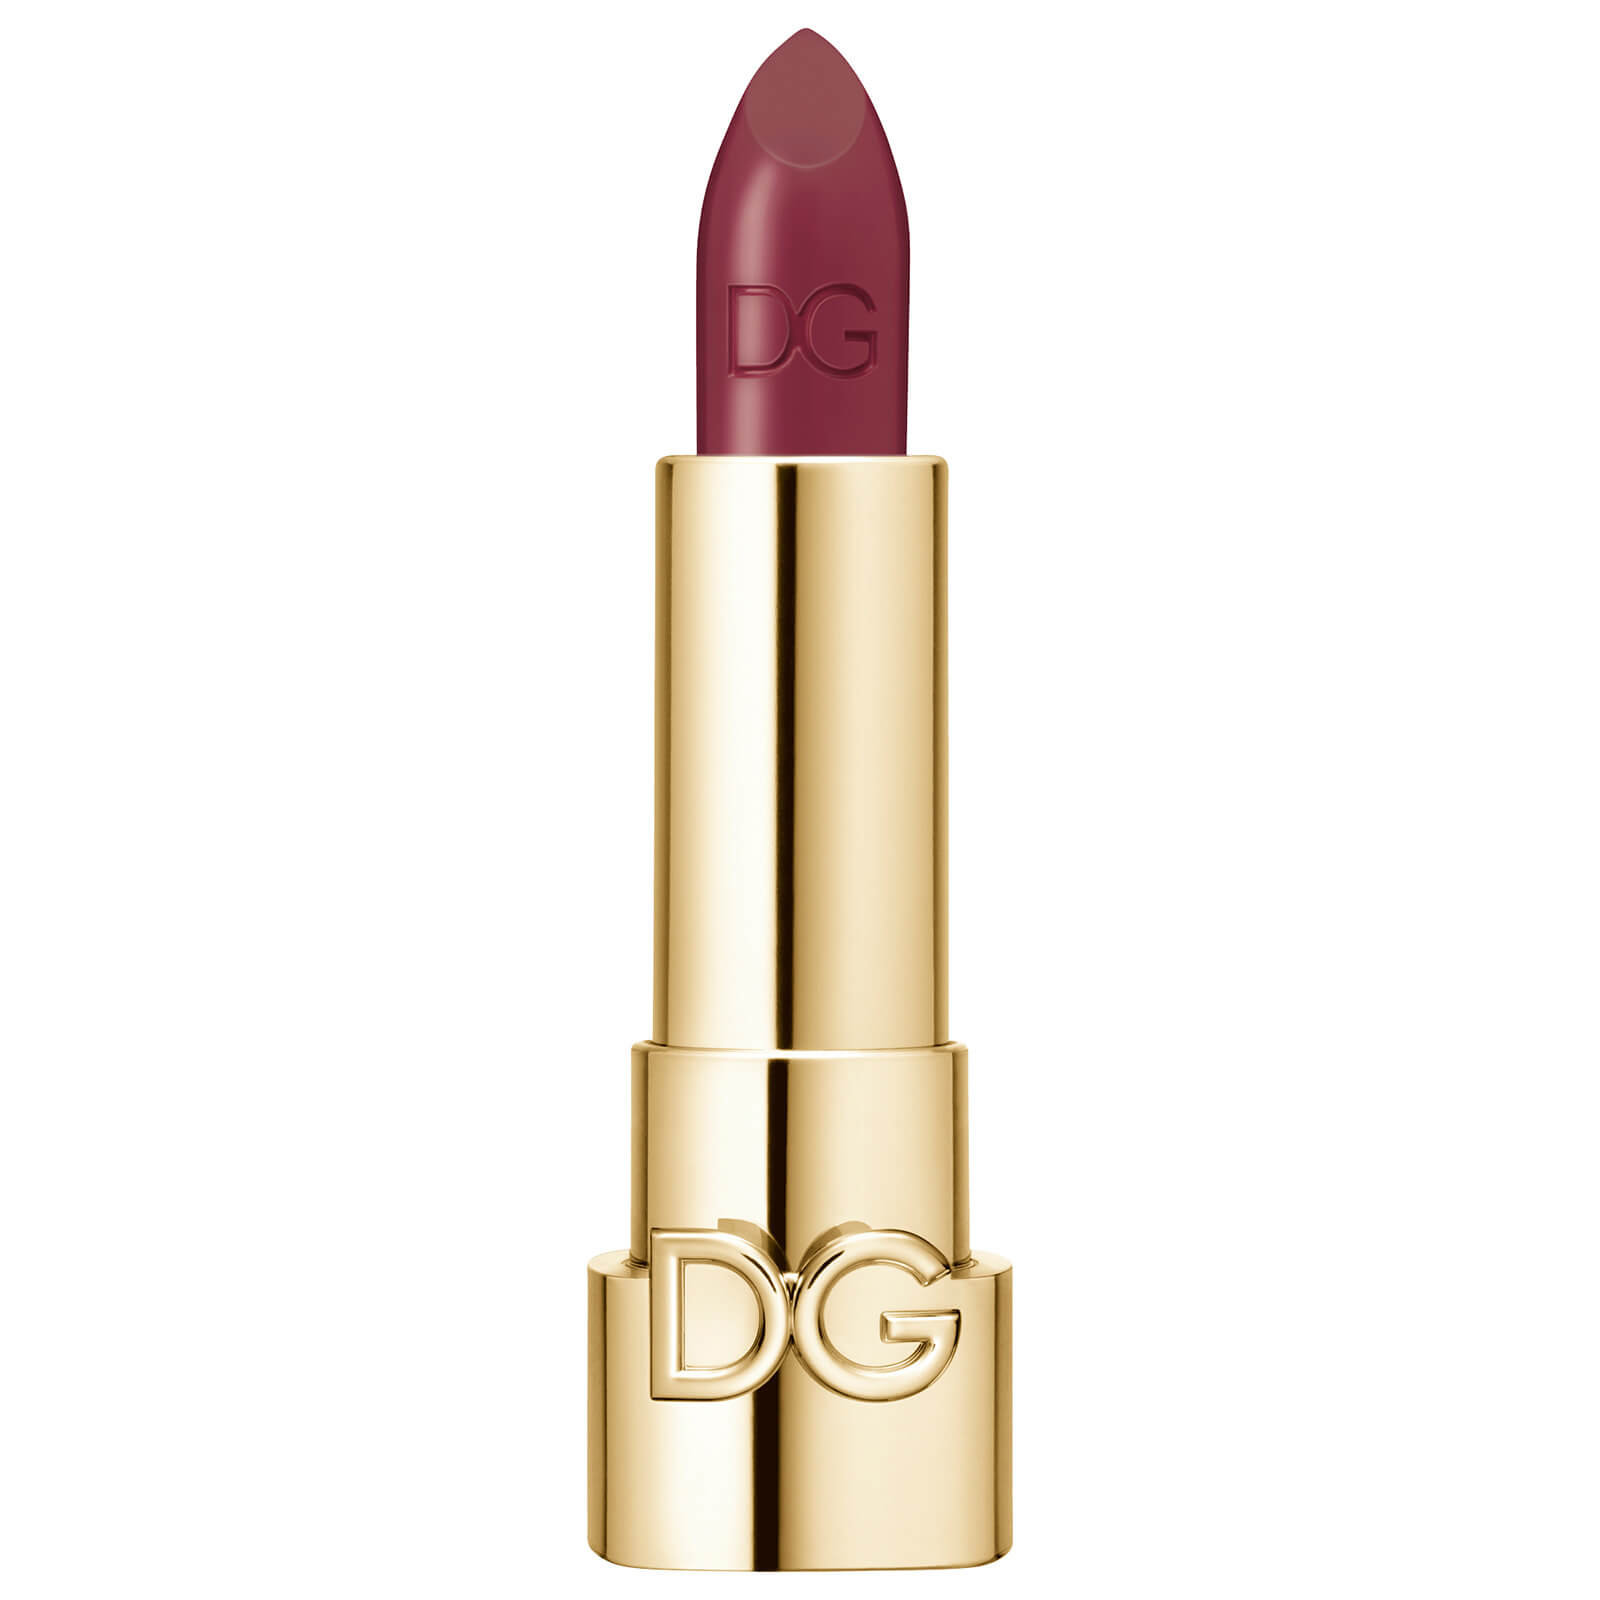 Dolce&Gabbana The Only One Lipstick 1.7g (No Cap) (Various Shades) - 320 Passionate Dahlia